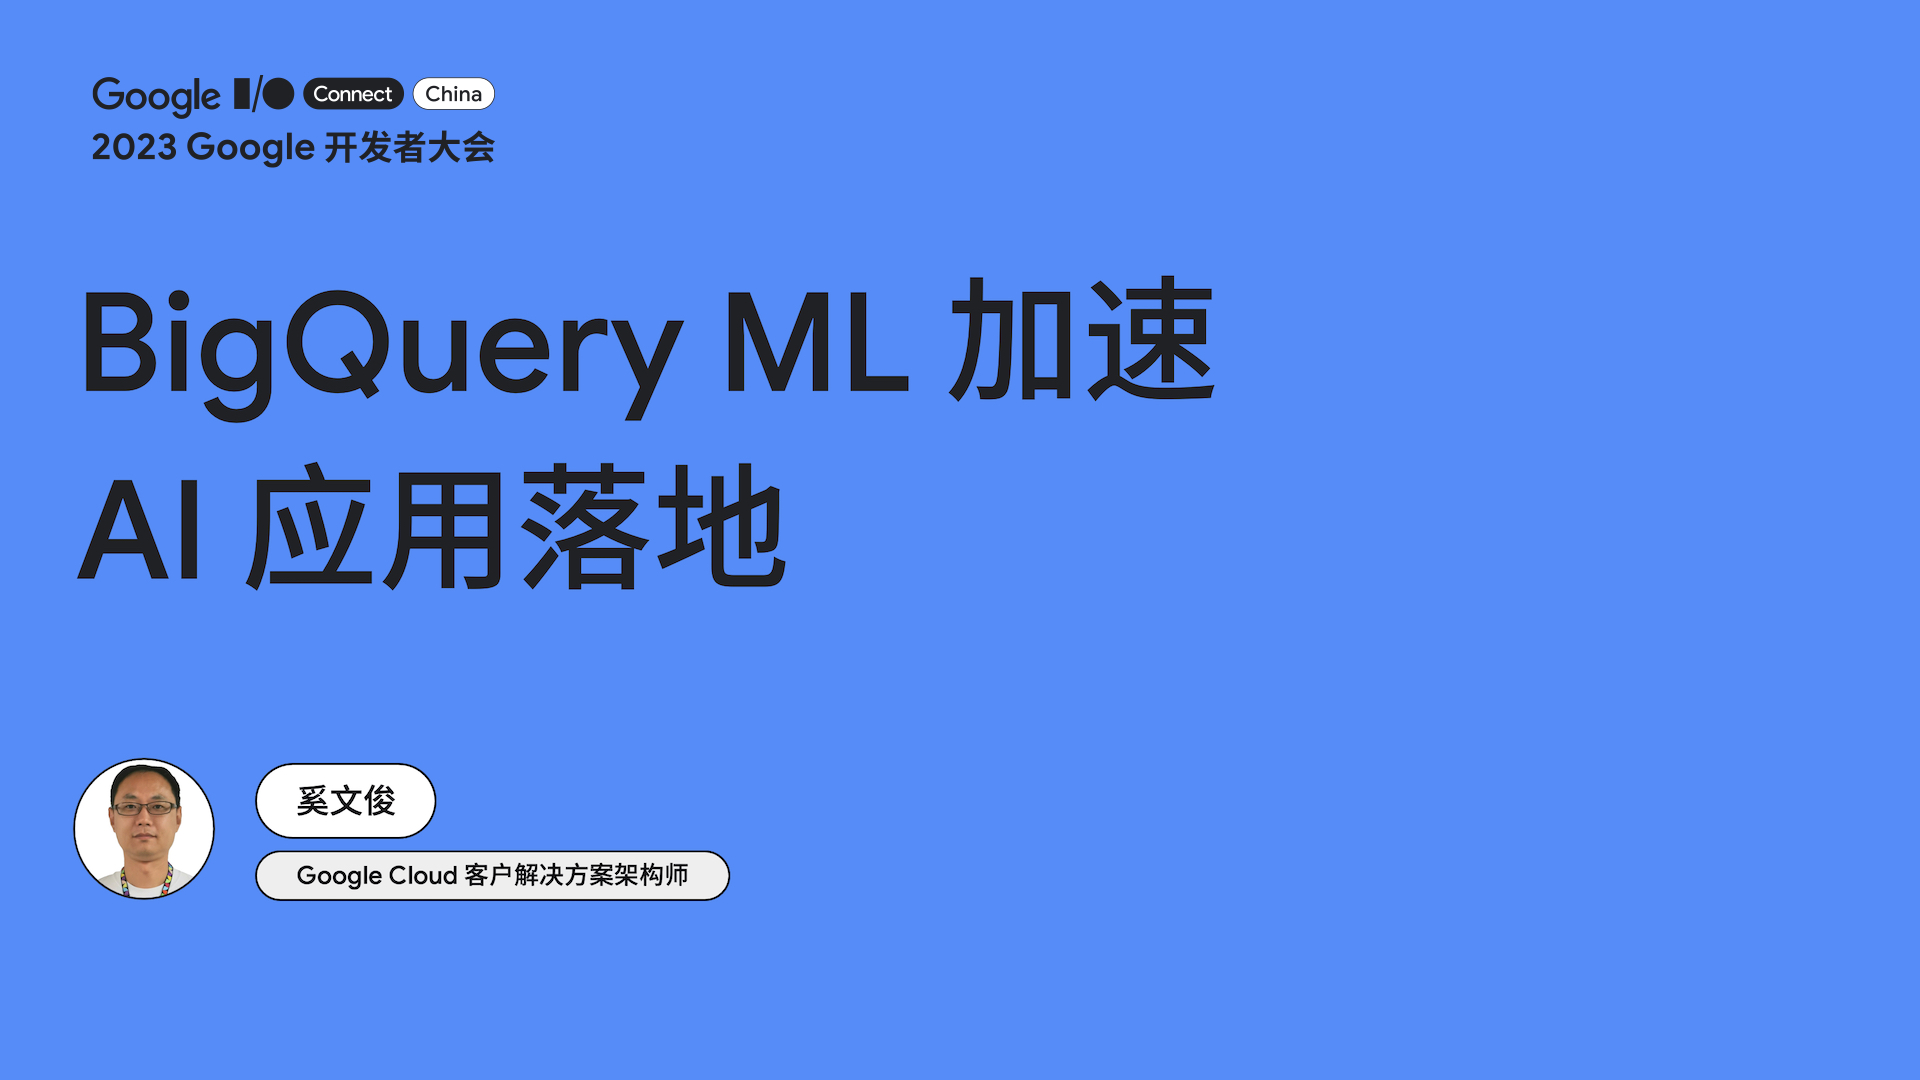  BigQuery ML accelerates the landing of AI applications